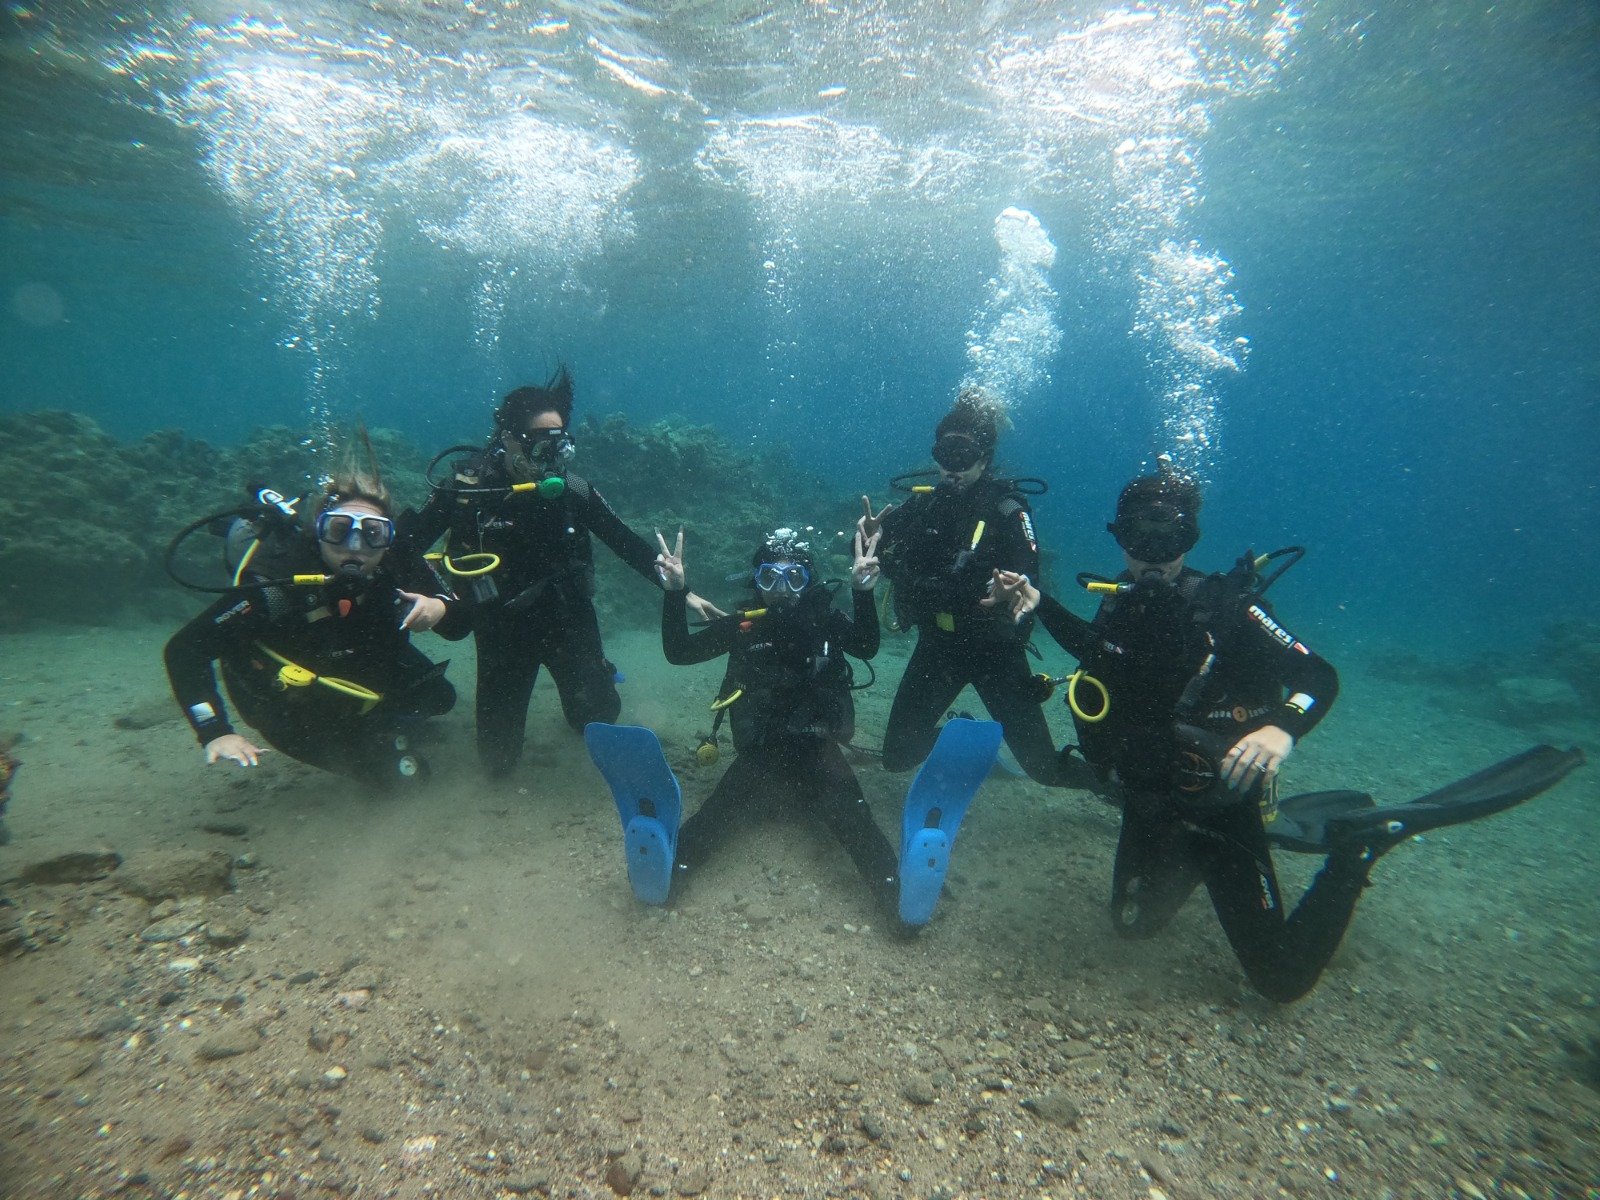 The Heart/Halev young women are now certified in Scuba Diving!